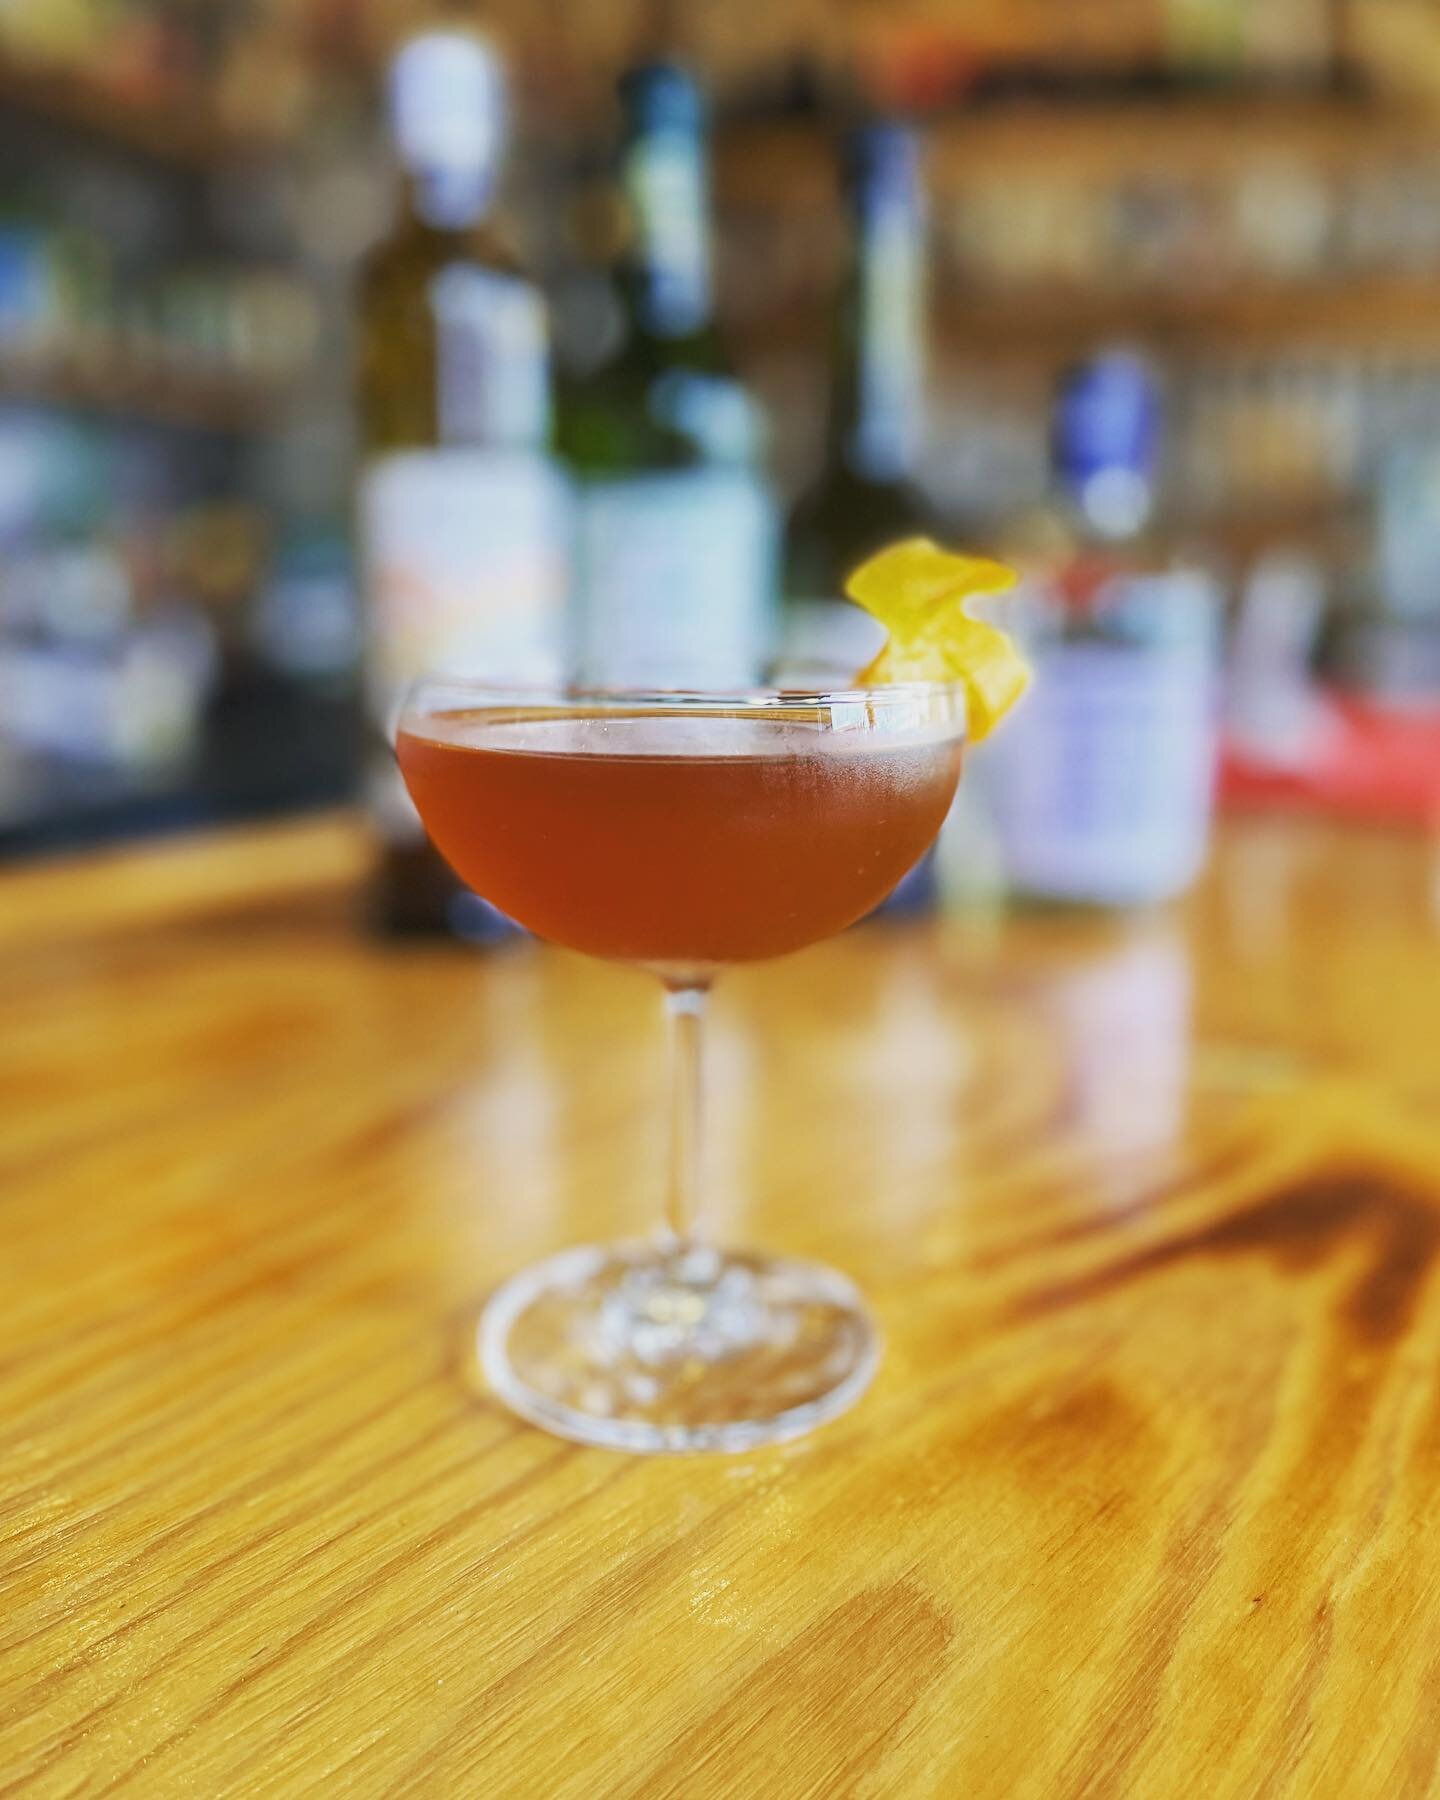 Negroni riff that makes you put on your full brim hat! 🍸 Tropic of Pumpkin Spice with Diplomatico Planas, Dolin Dry, Bigallet China-China, and Suze plus some secret bitters combos. Holy moly this hits a chilly night right between the eyes. Come grab